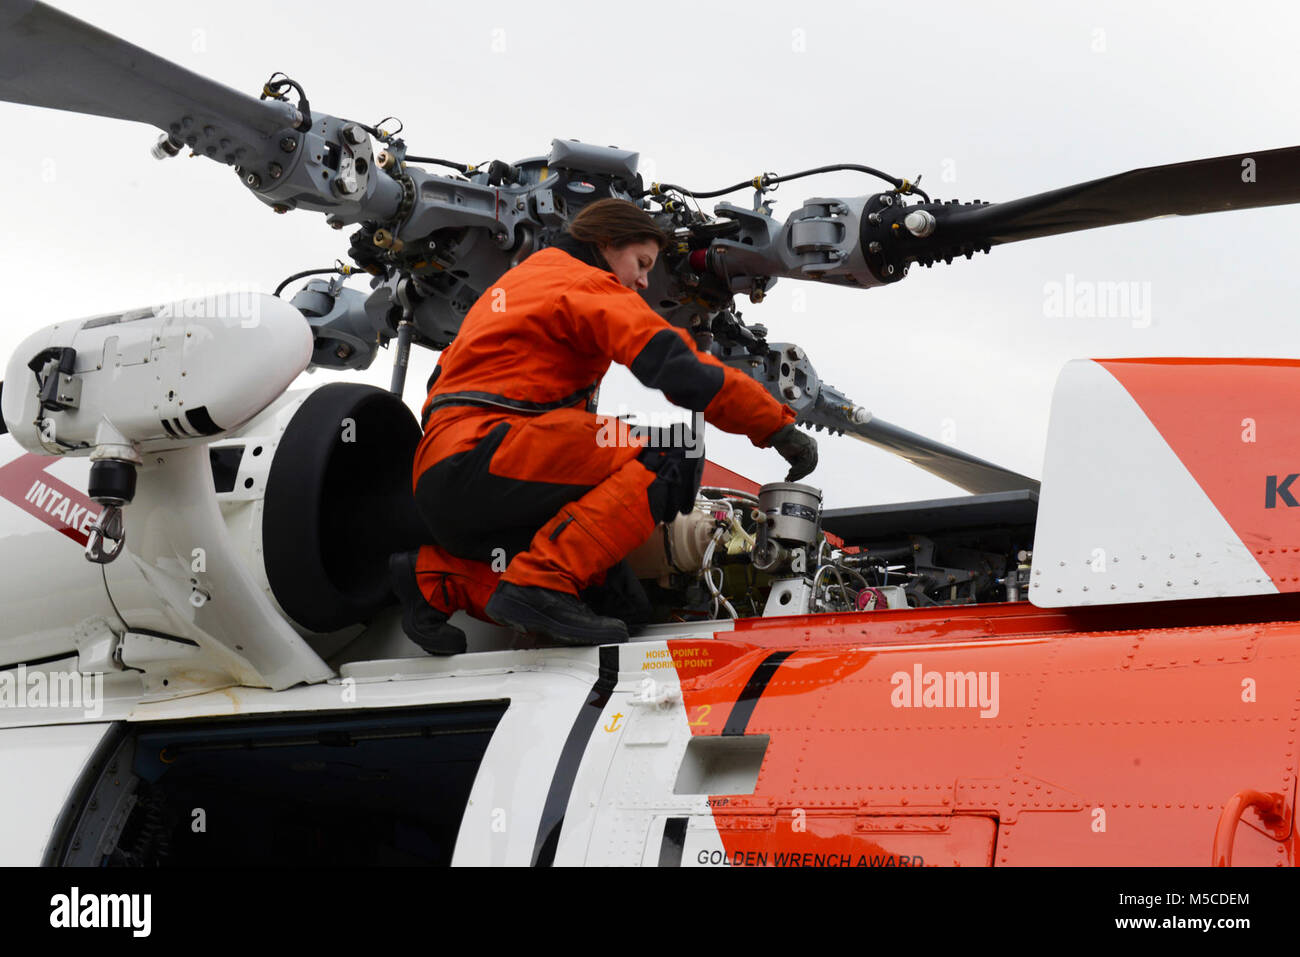 Petty Officer 2nd Class Eileen Best, an aviation maintenance technician, performs post-flight checks on an MH-60 Jayhawk helicopter at Coast Guard Air Station Kodiak, Alaska, Feb. 13, 2018. Post-flight checks are conducted to evaluate the condition of the aircraft after every flight. U.S. Coast Guard Stock Photo